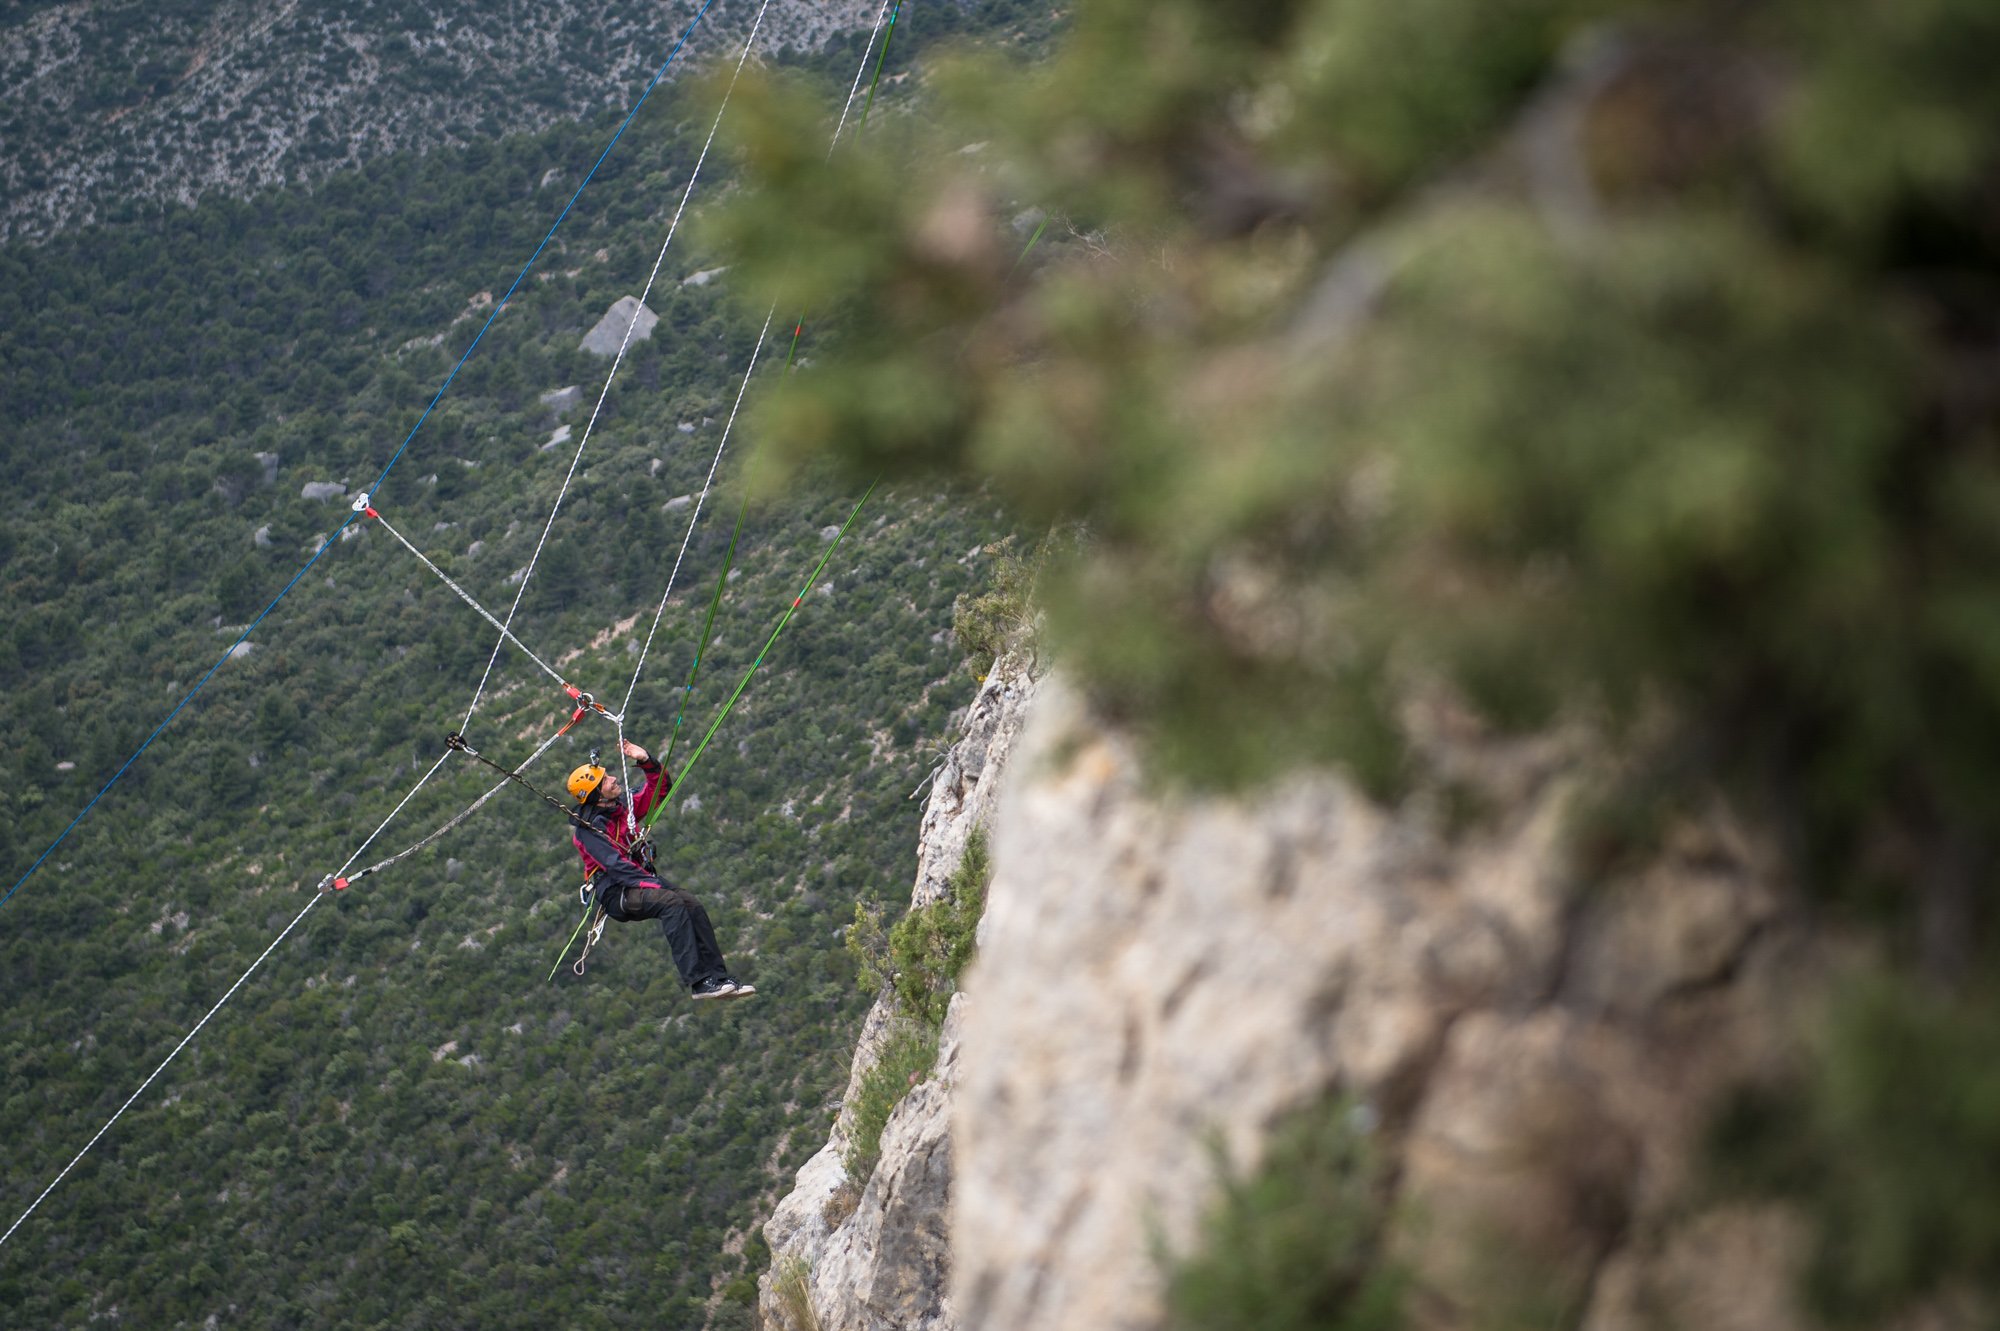 Spain - Extreme sports - World record of rope jump in spain with